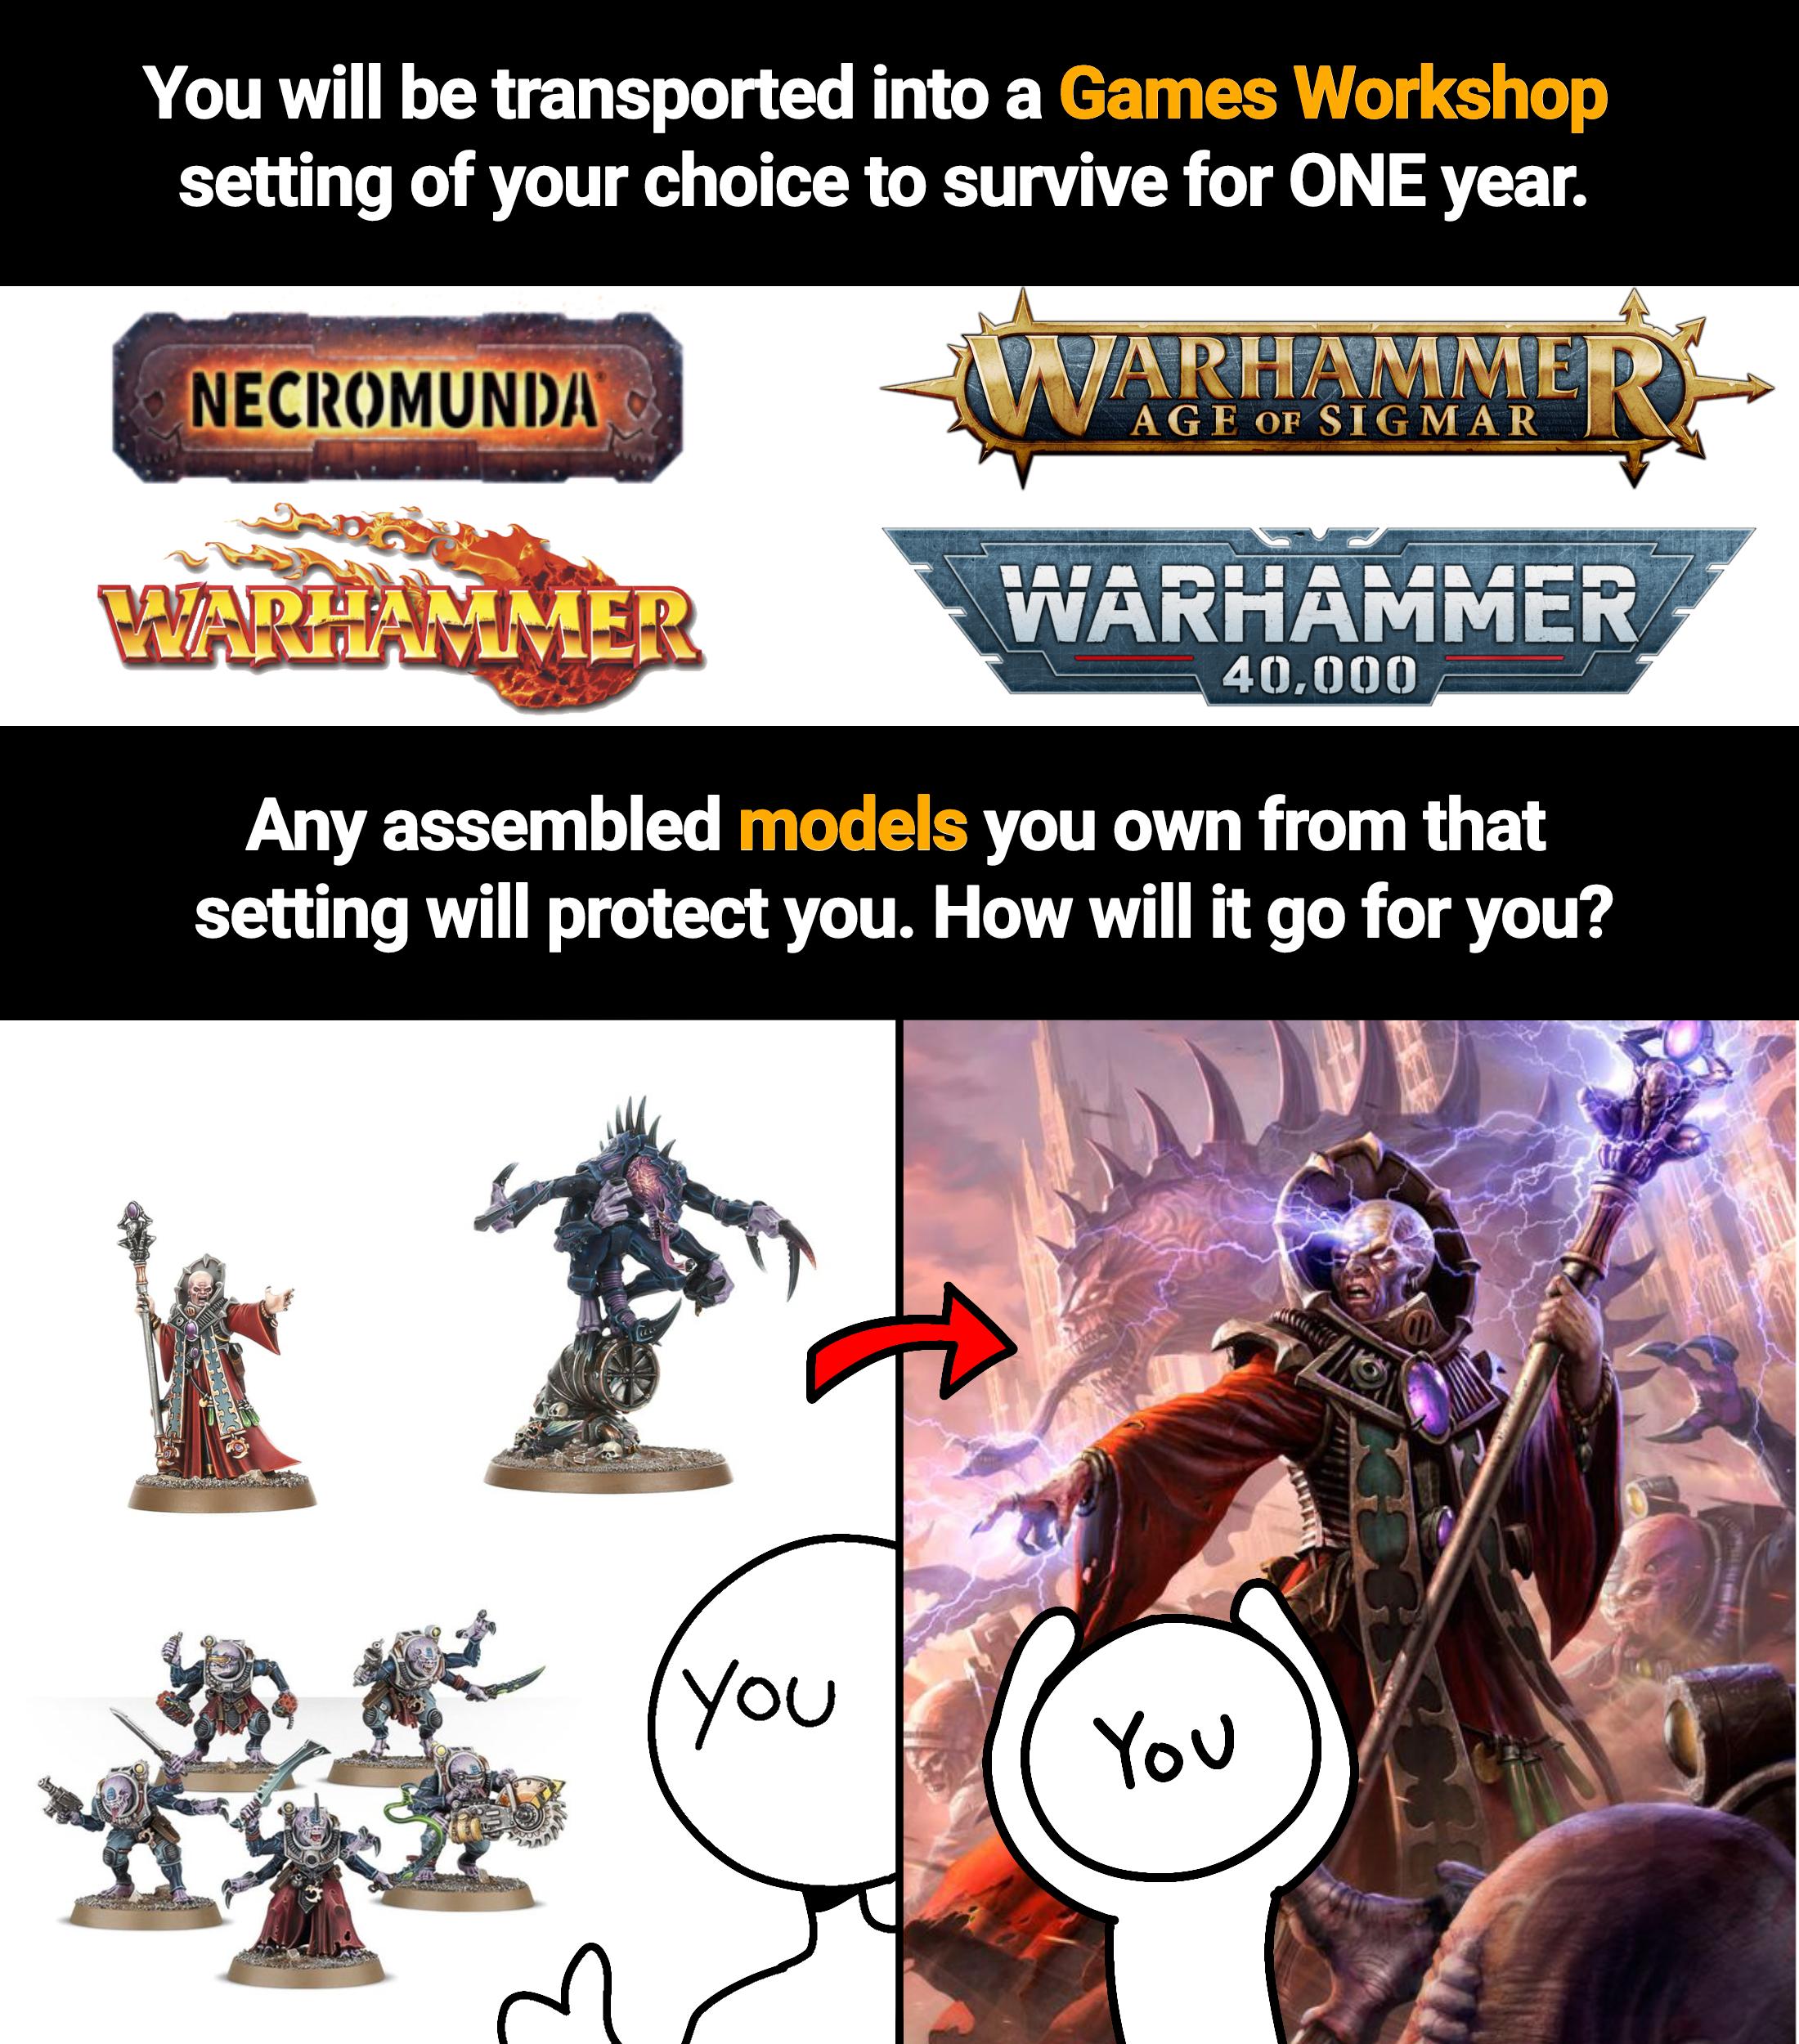 You will be transported into a Games Workshop setting of your choice to survive for ONE year. NECROMUNDA WARHAMMER AGE OF SIGMAR WARHAMMER WARHAMMER 40,000 Any assembled models you own from that setting will protect you. How will it go for you? ন You You